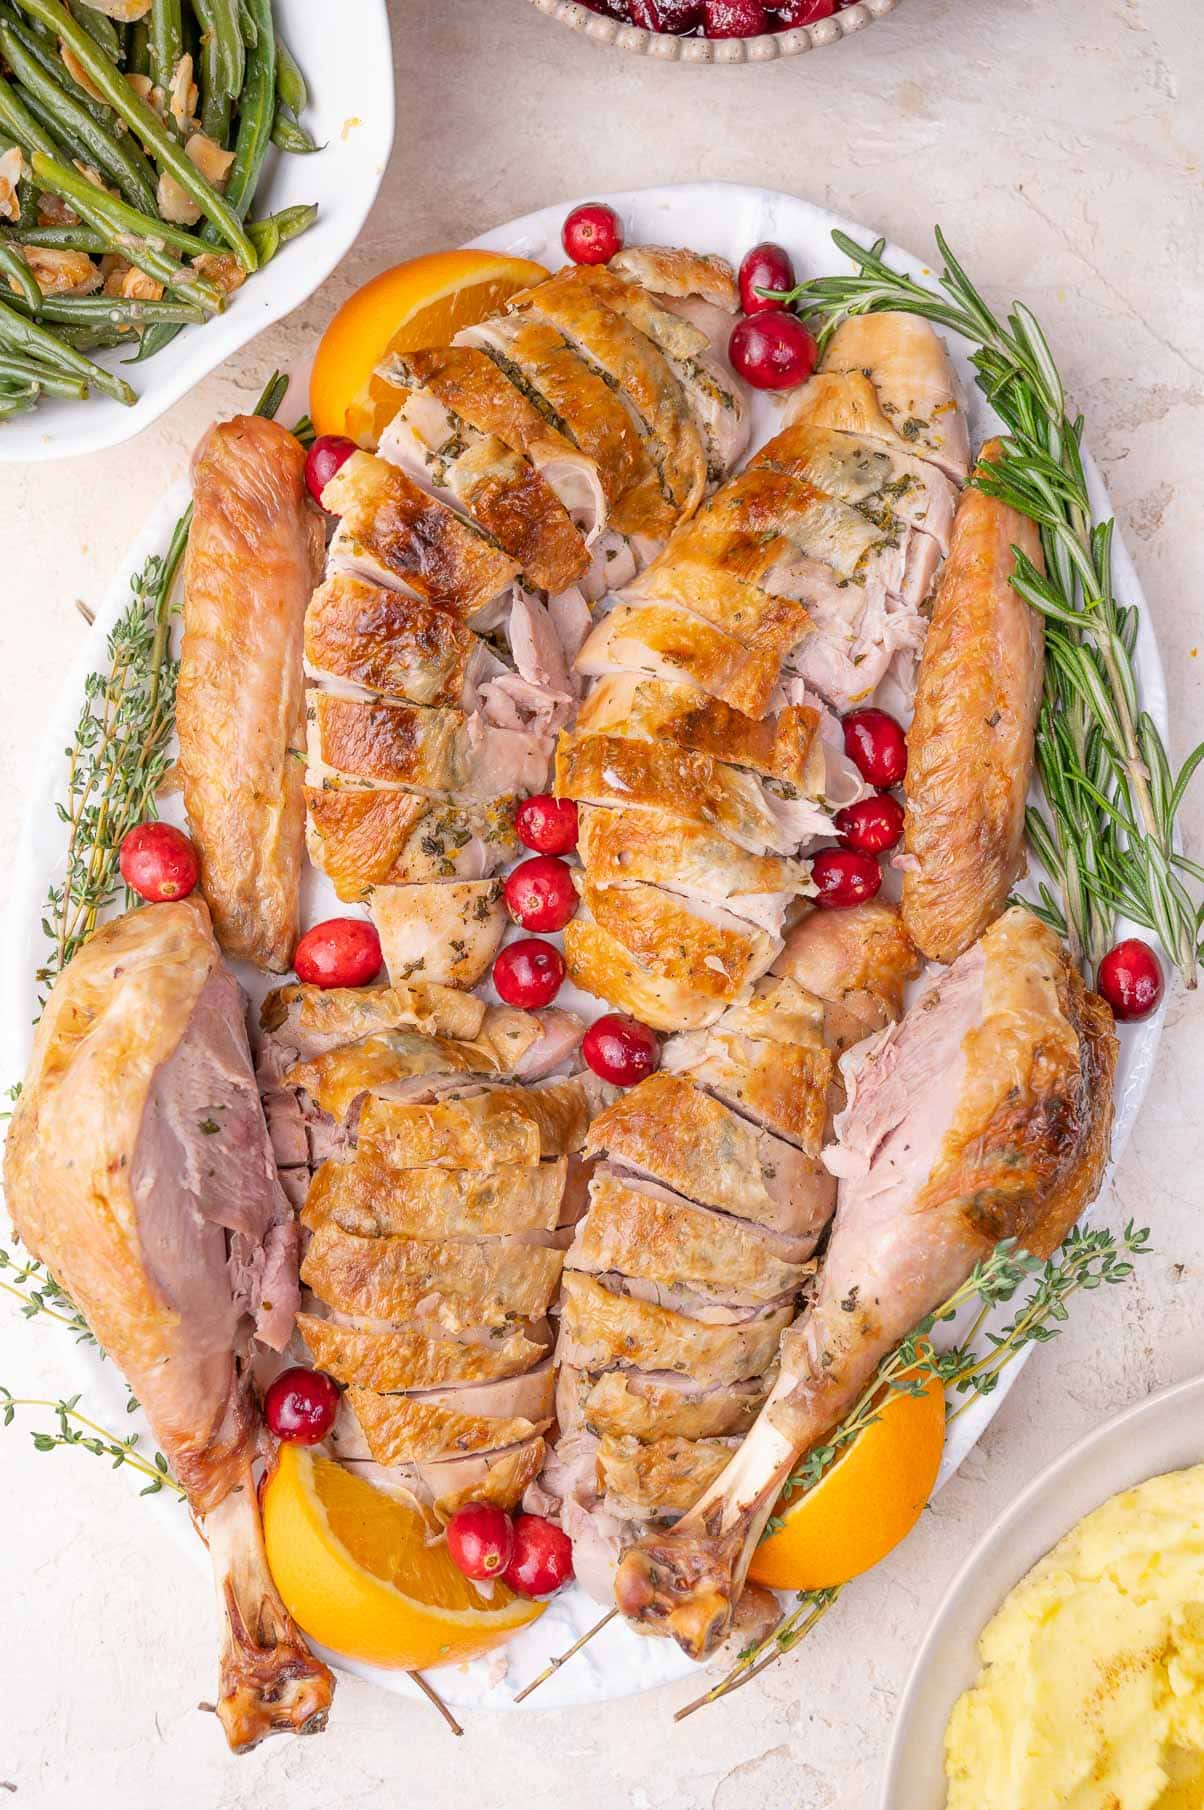 Carved turkey on a white plate surrounded with oranges, cranberries, and herbs.